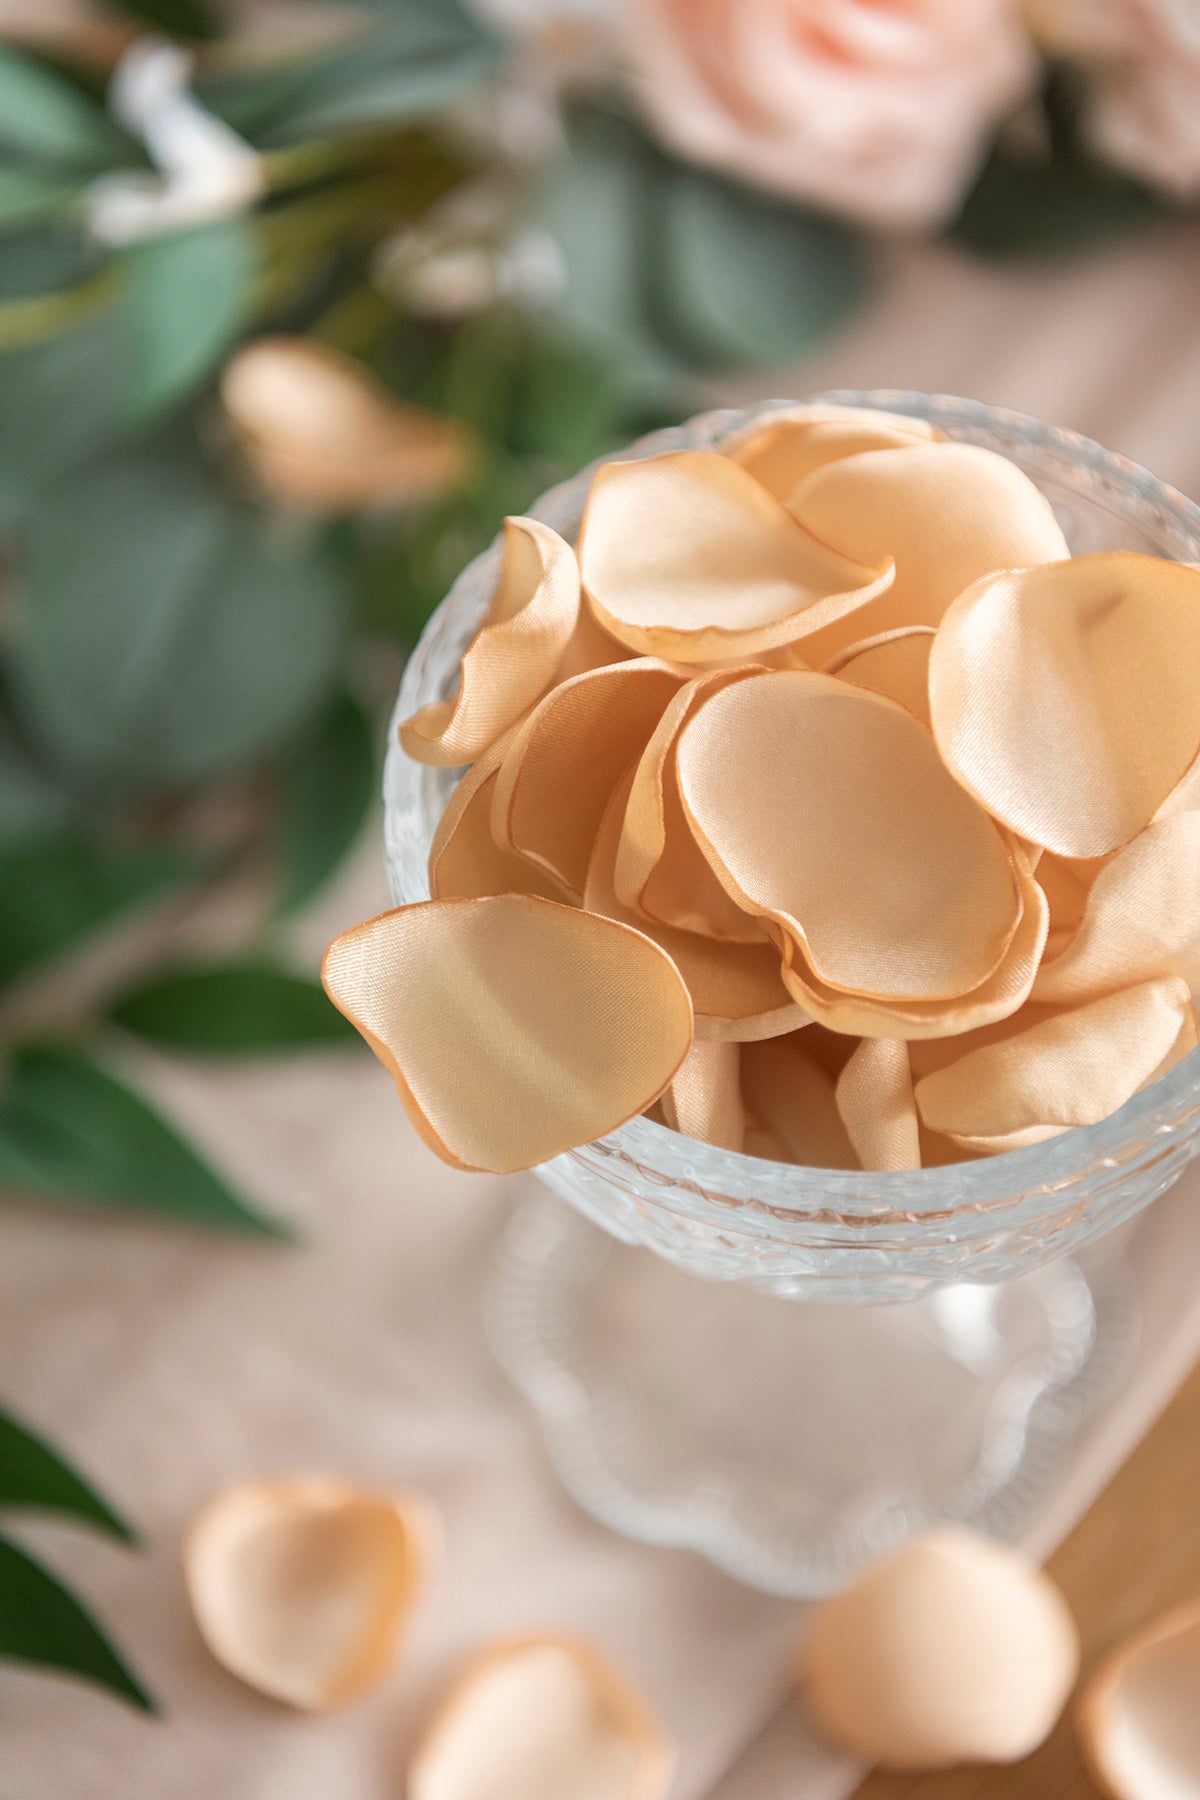 Champagne Blush Pink Artificial Rose Petals  Wedding Decorations 